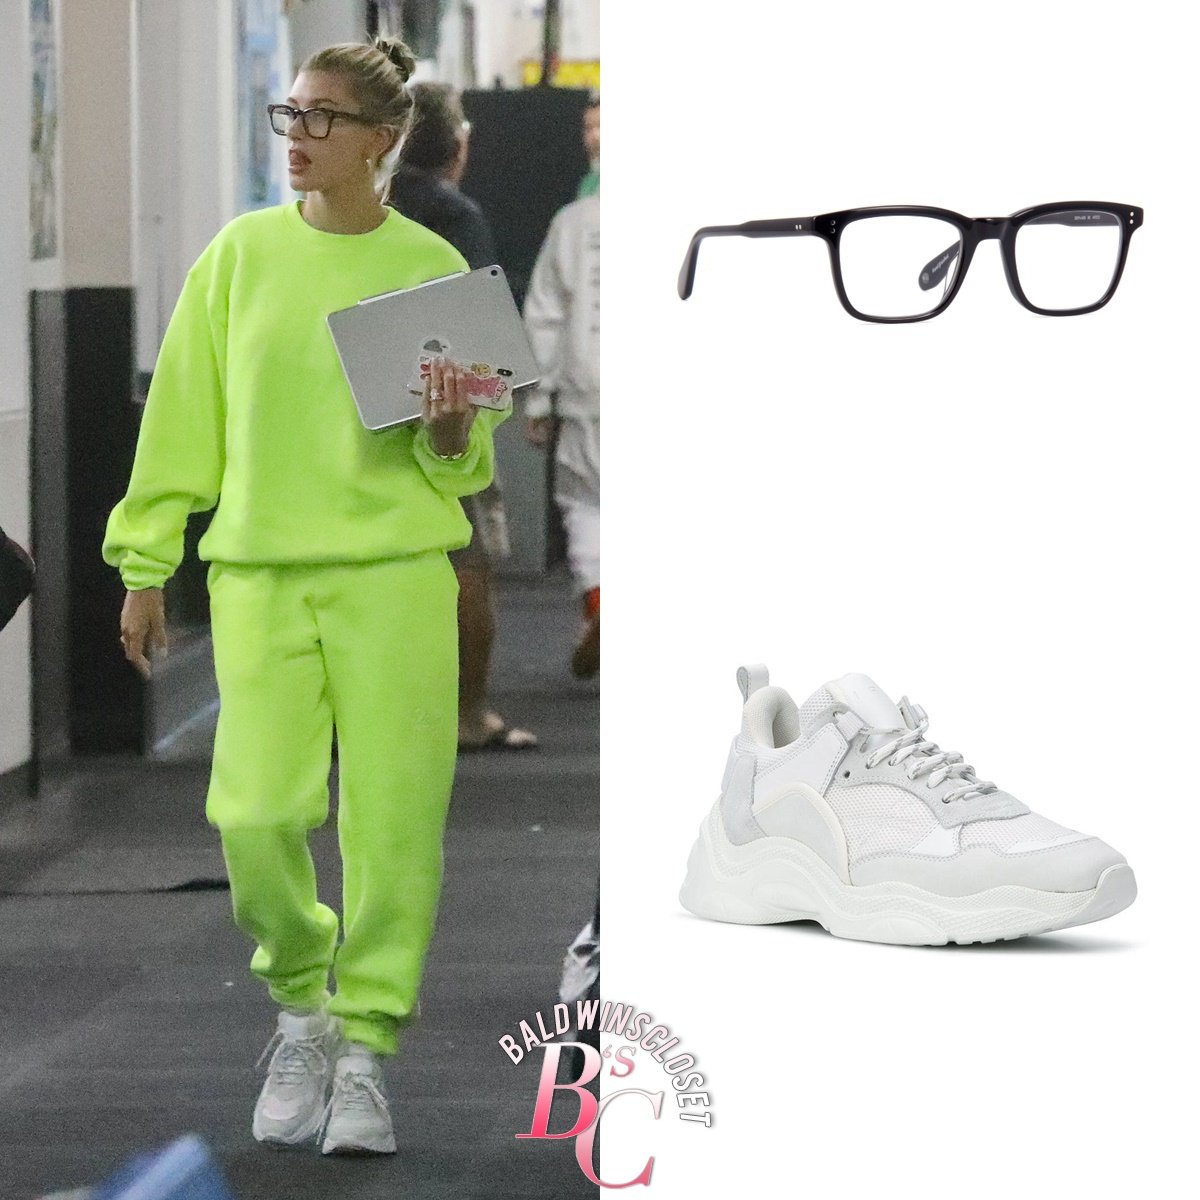 Hailey Bieber's Closet on Twitter: "July 2, 2019 - #HaileyBieber looked very comfortable wearing the eye-catchy #Cherry American Classic Crewneck for $175.00 and the Sweatpants for $165.00. She wore it with #